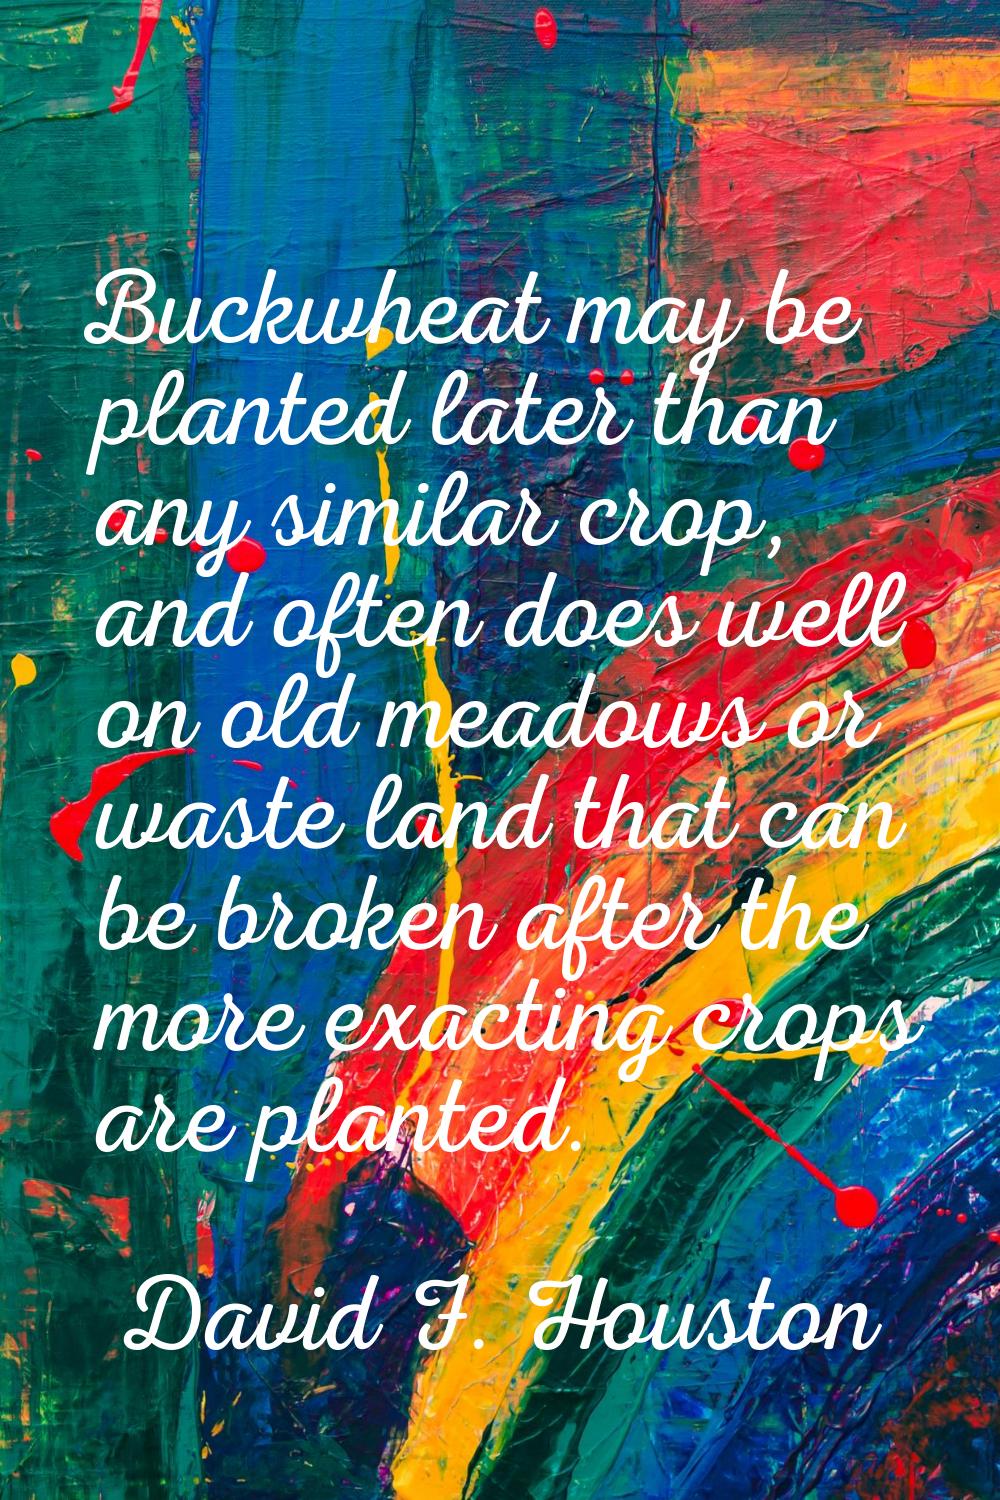 Buckwheat may be planted later than any similar crop, and often does well on old meadows or waste l